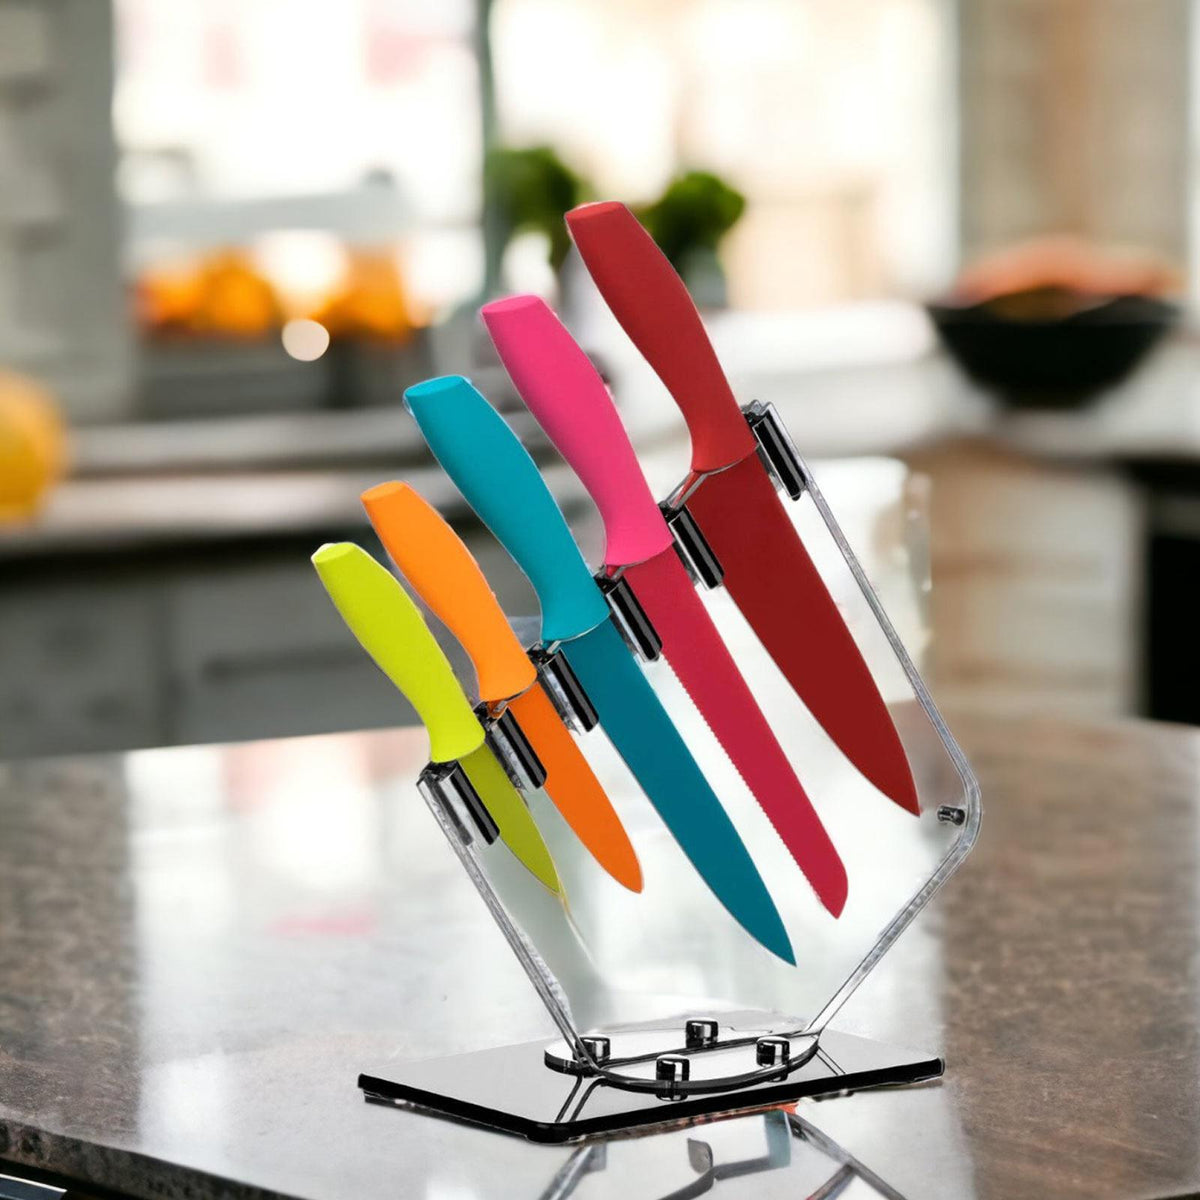 Choose from a Wide Variety of Great Quality at Low Prices from Brights Pink  5 Piece Knife Block Set Aubina X